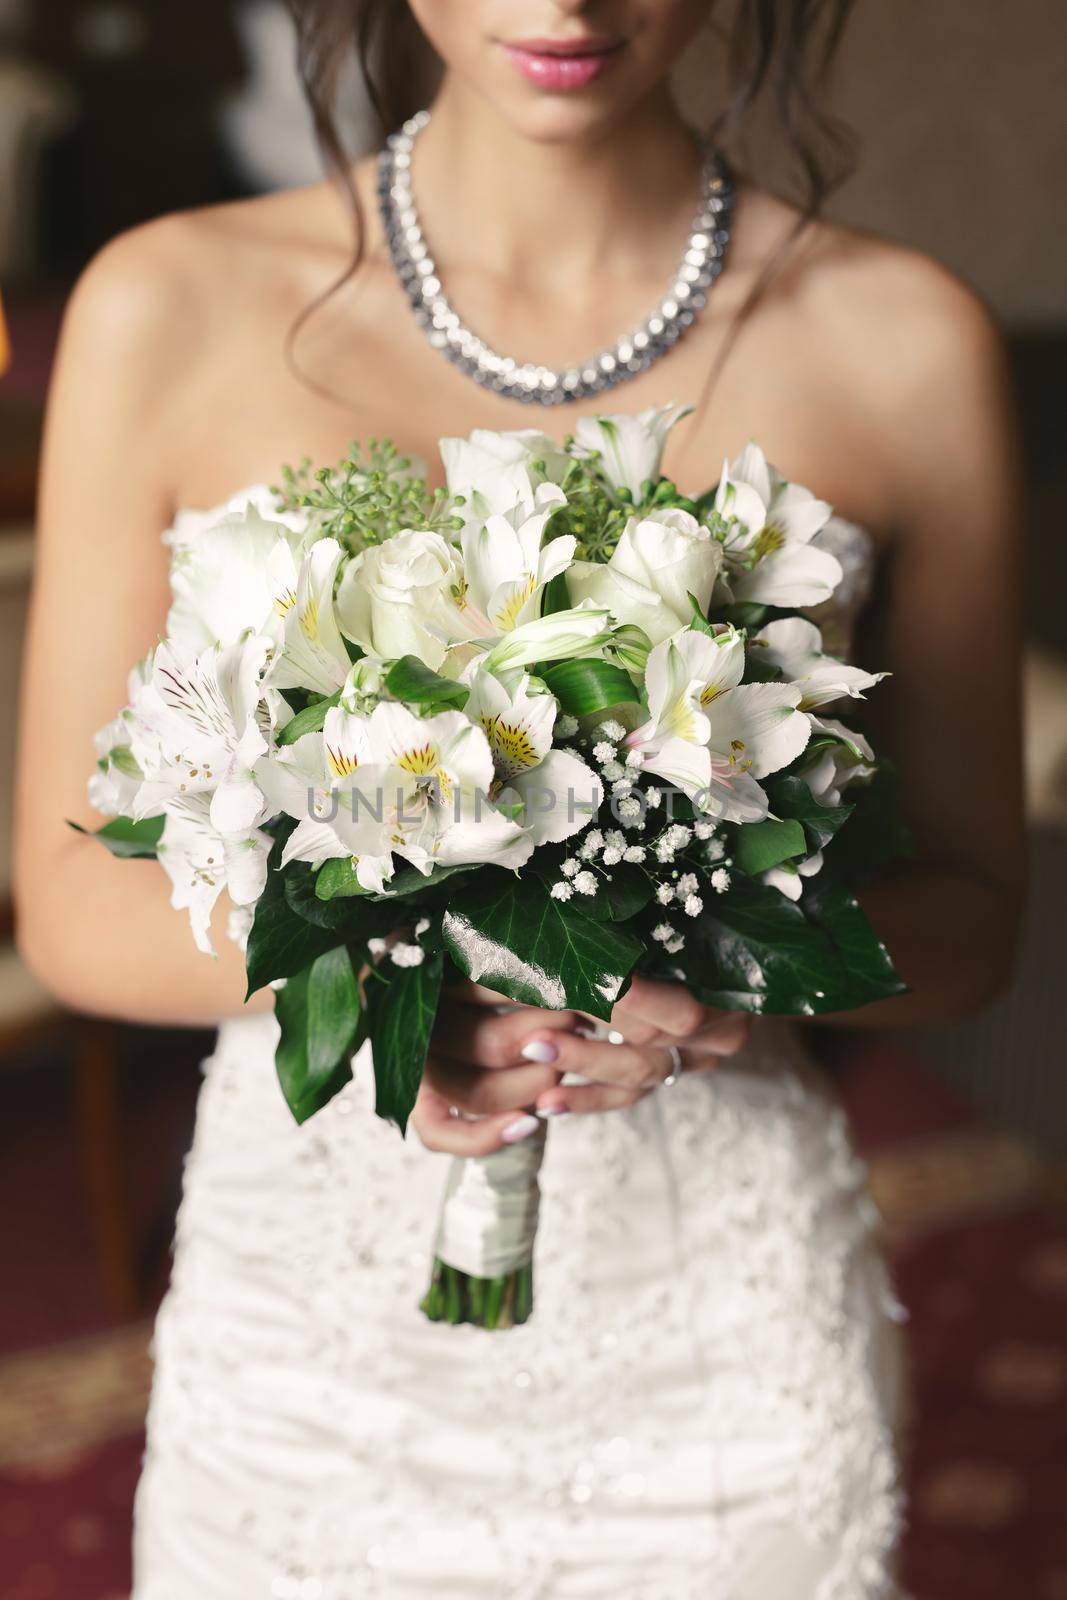 Close-up of a bouquet of flowers in the hands of the bride by StudioPeace